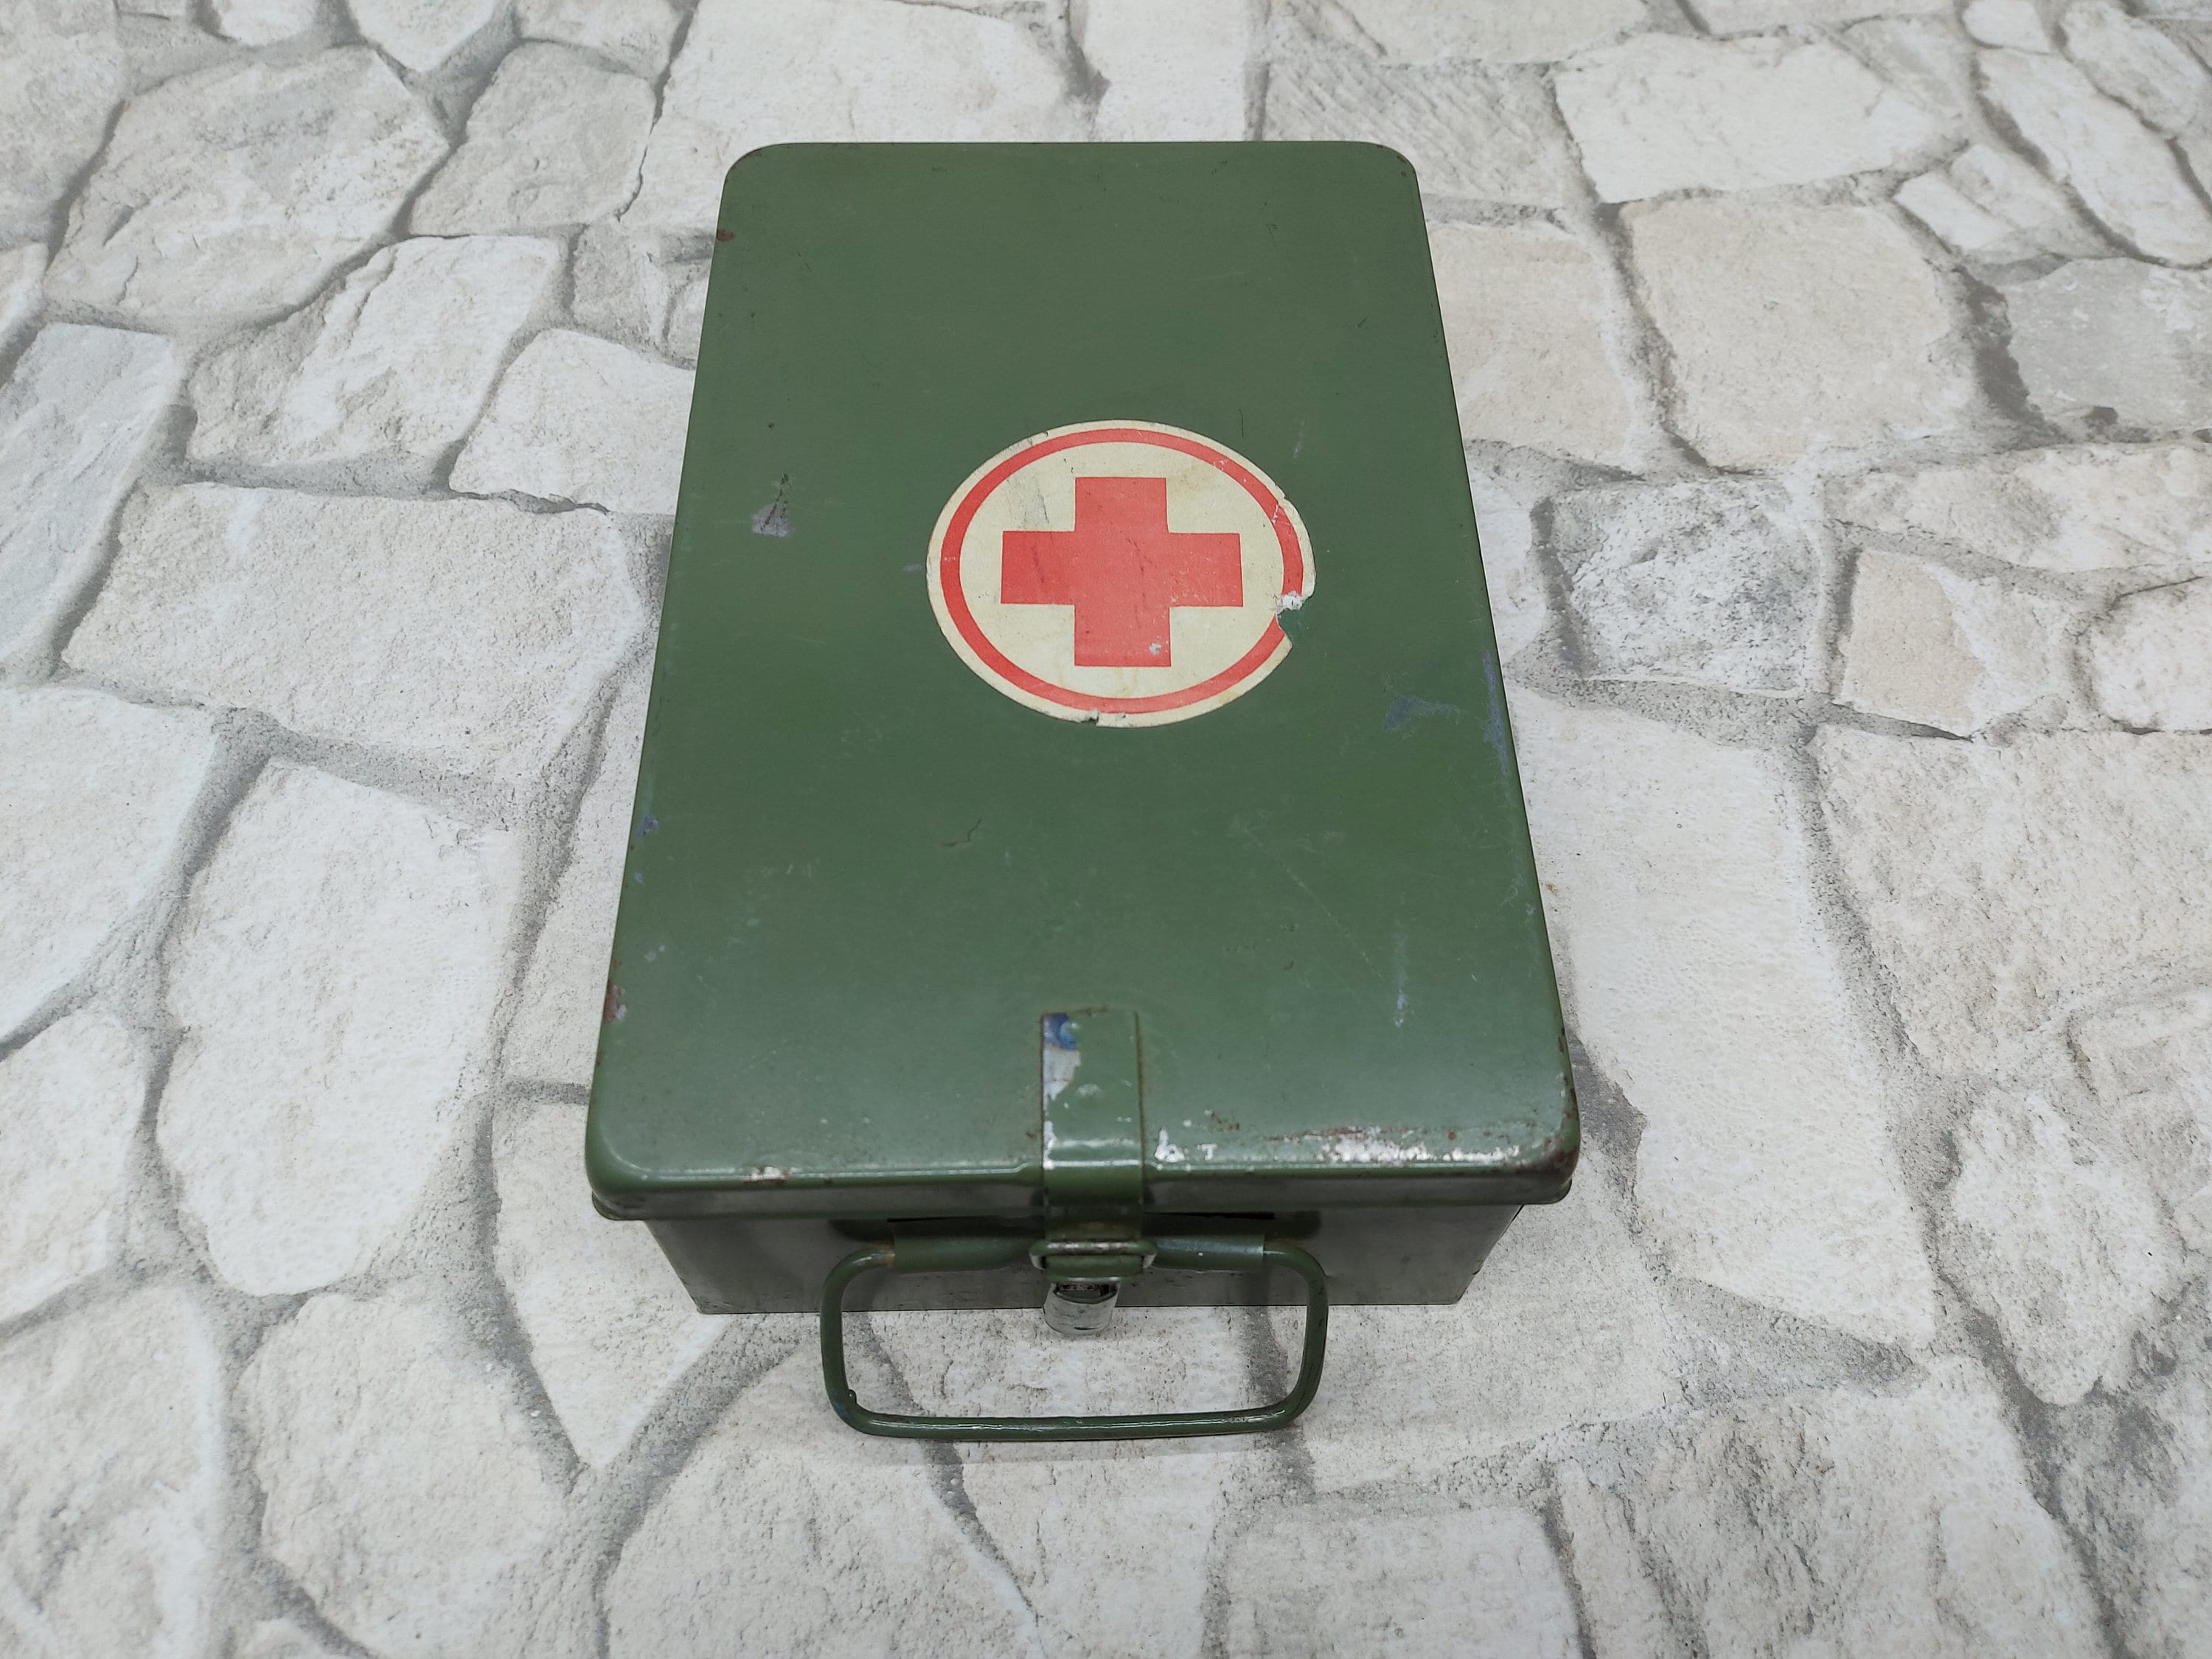 Military Red Cross Box Military Metal Box Army STORAGE CONTAINER Military  Surplus Container Military Box Army Box Soldier Case Soviet USSR 